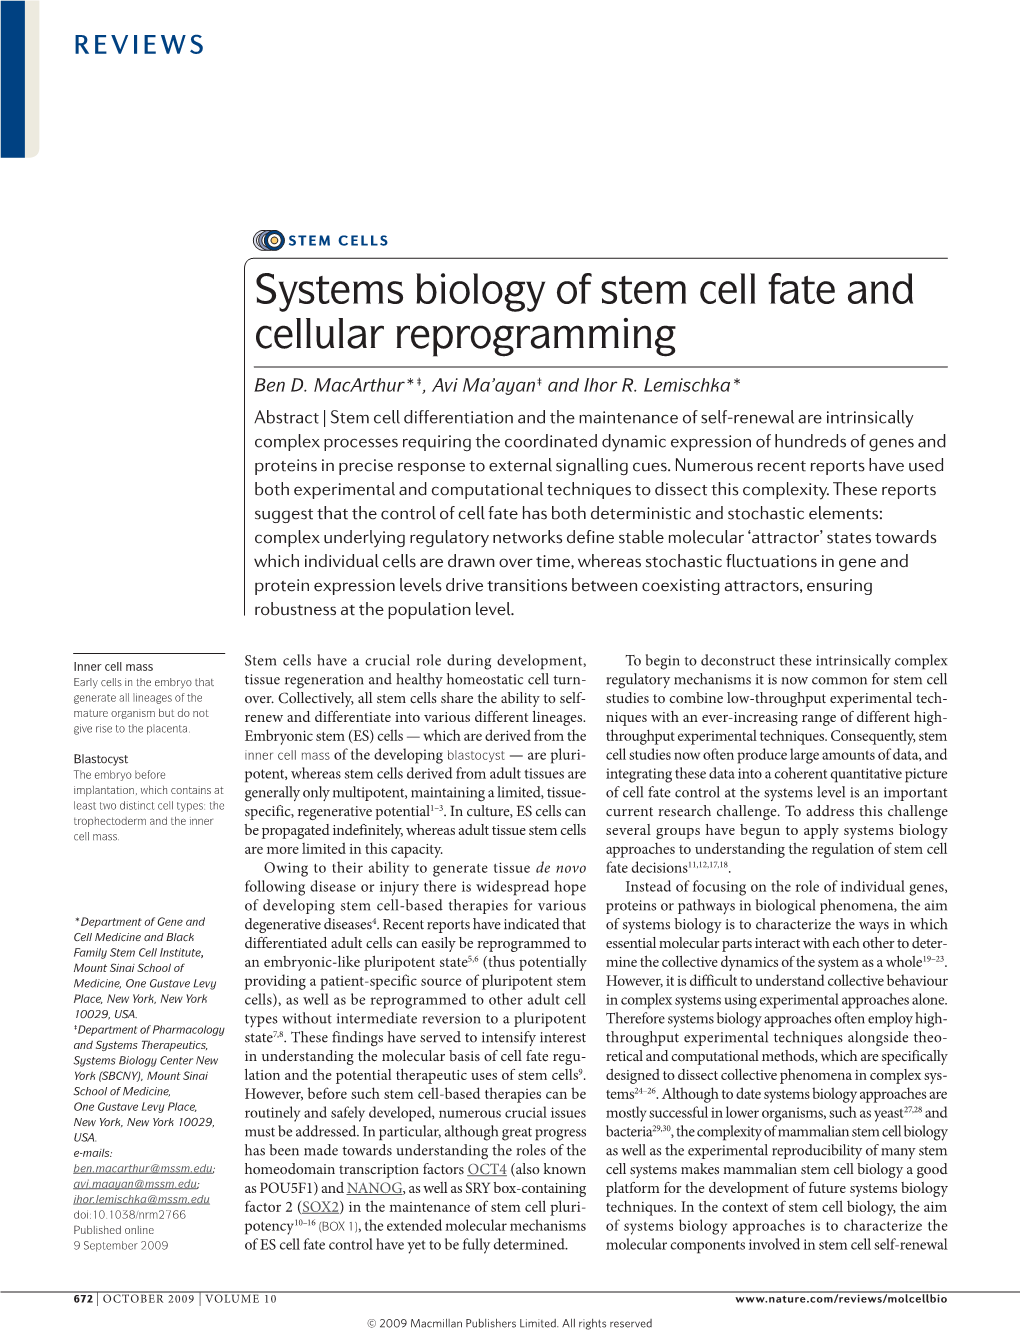 Systems Biology of Stem Cell Fate and Cellular Reprogramming